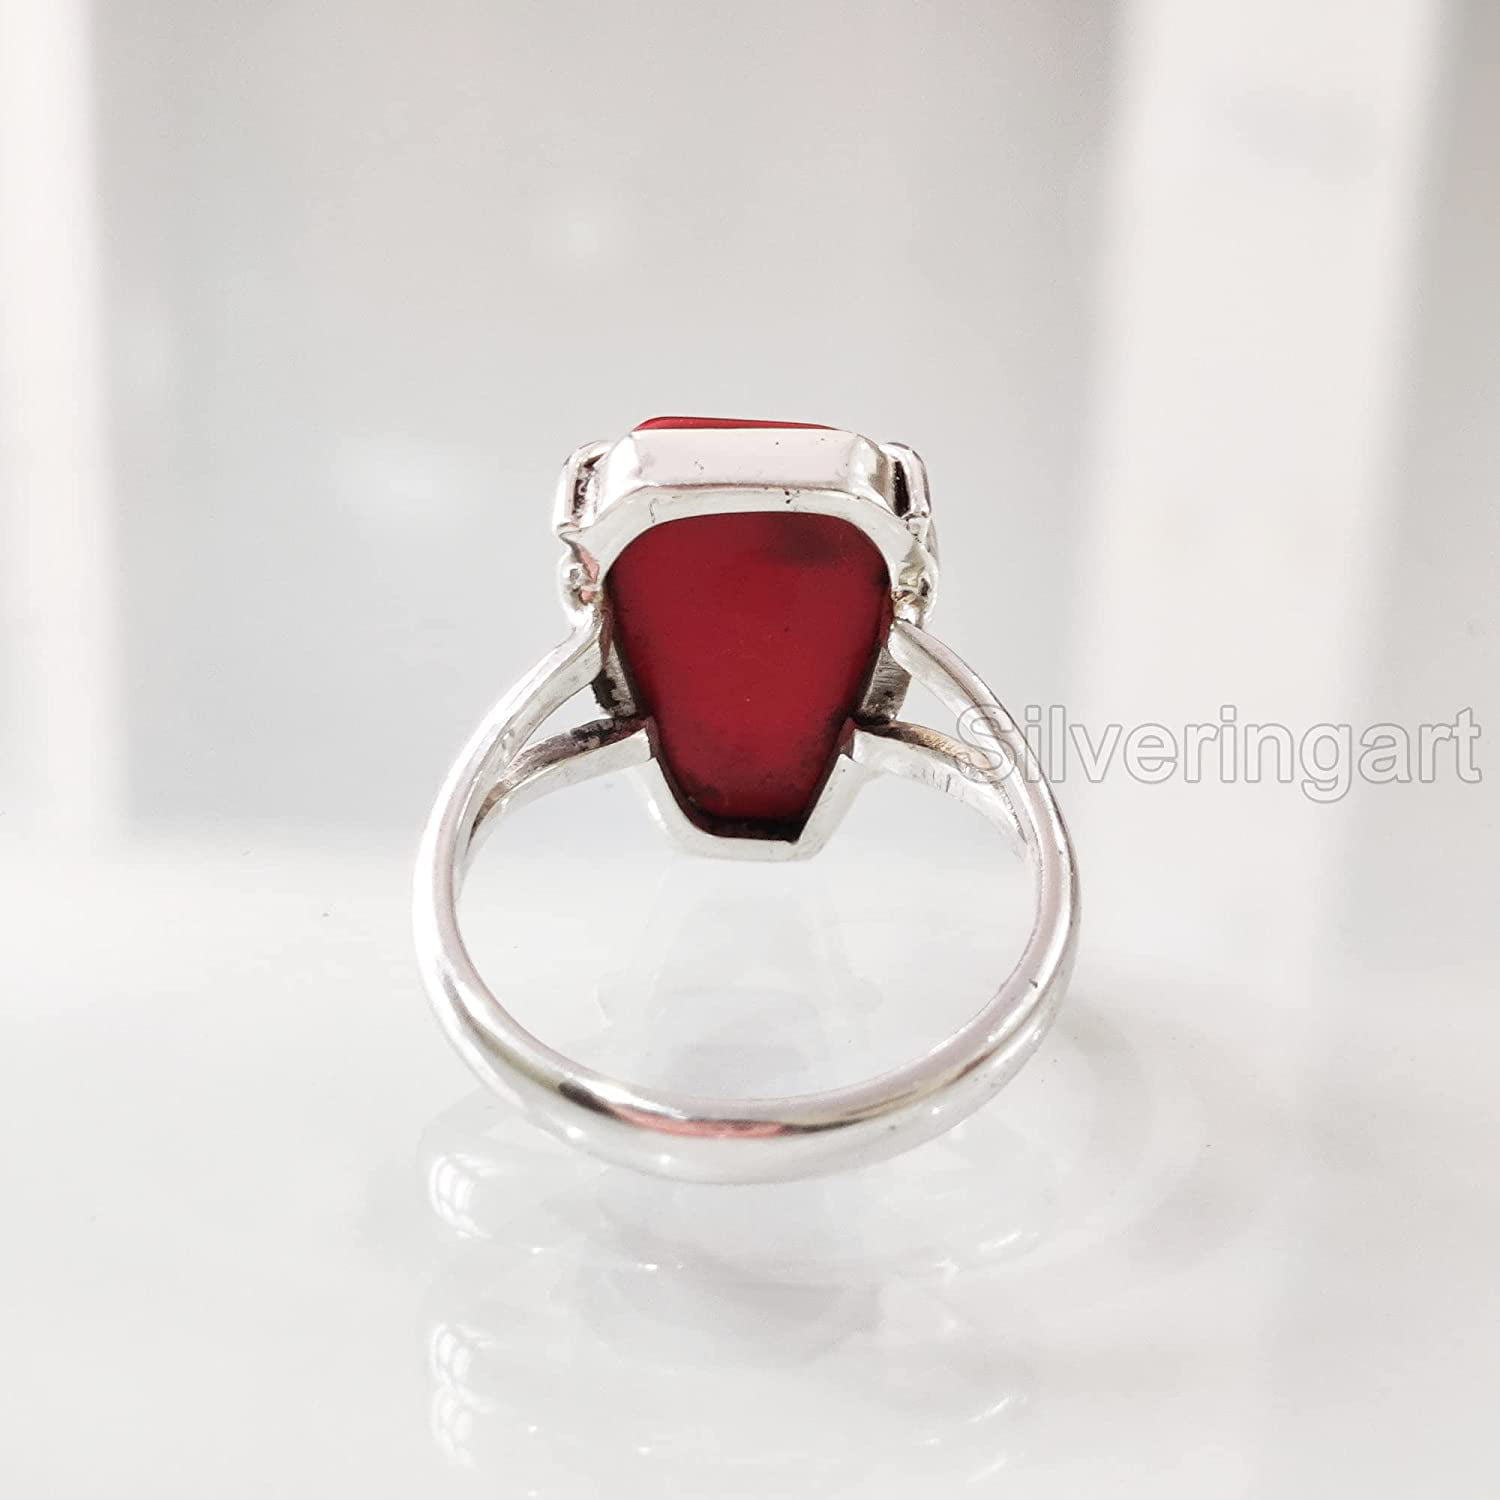 Natural Red Coral Round Shape Gemstone Ring, 925 Sterling Silver Ring,  Bacha Ring, Tiny Ring, Women's Ring, Gift for Lovevalentine Gift - Etsy |  Tiny rings, Gemstone rings, Women rings